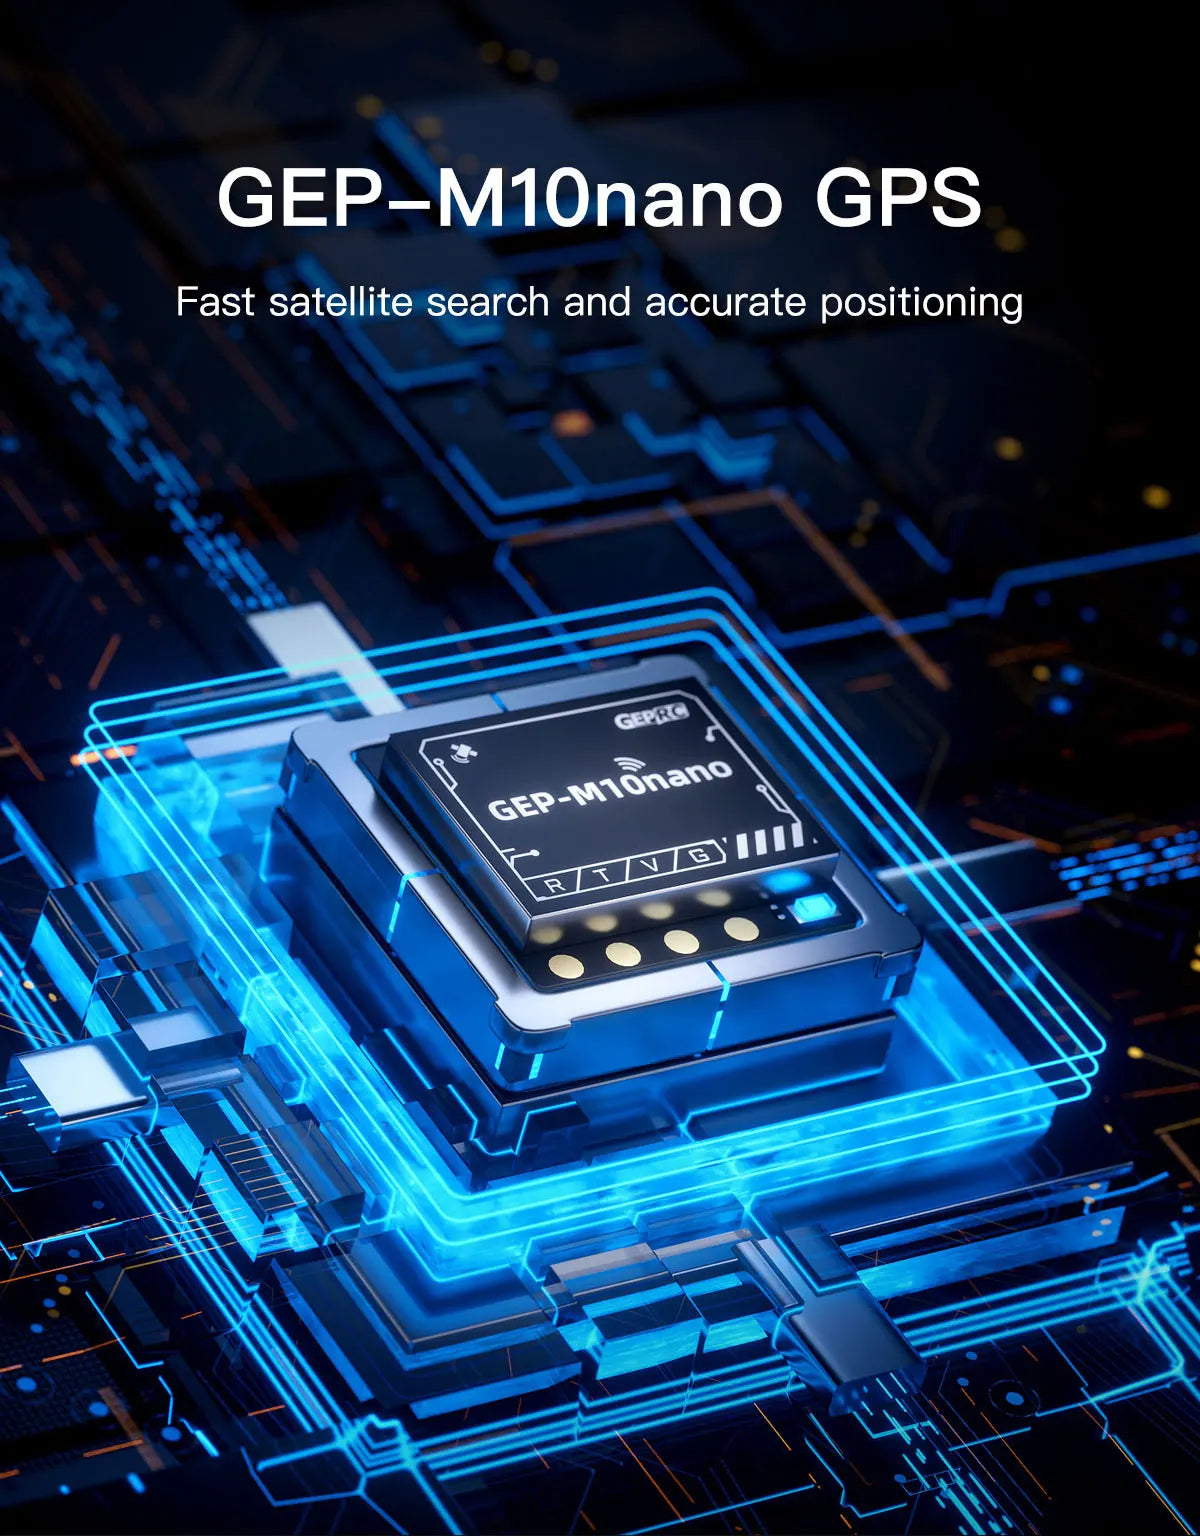 GEPRC Tern-LR40 Analog Long Range FPV, GepeG Gep-Mionano GPS Fast satellite search and accurate positioning Ge